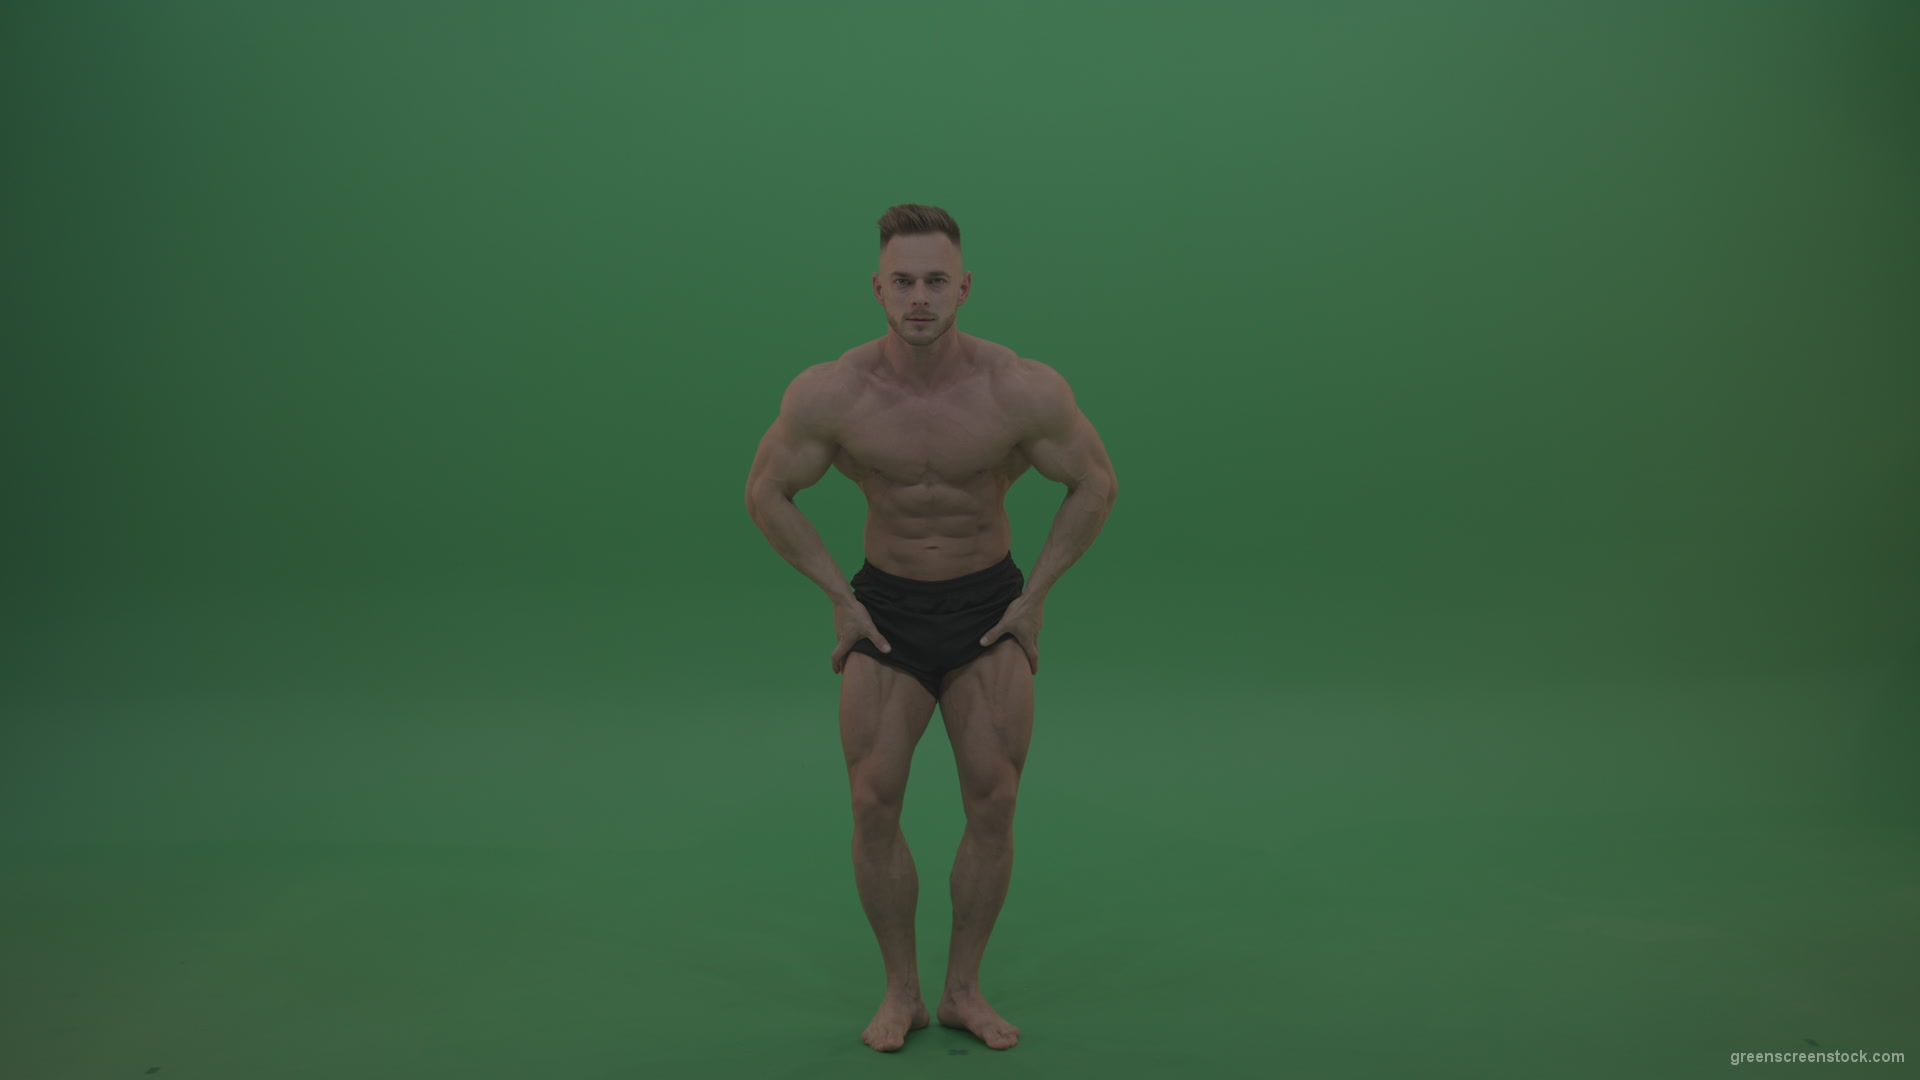 Young_Sportsman_Showing_Front_Double_Biceps_And_Thigh_Muscles_Bodybuilding_Positions_On_Gren_Screen_Wall_Background_006 Green Screen Stock